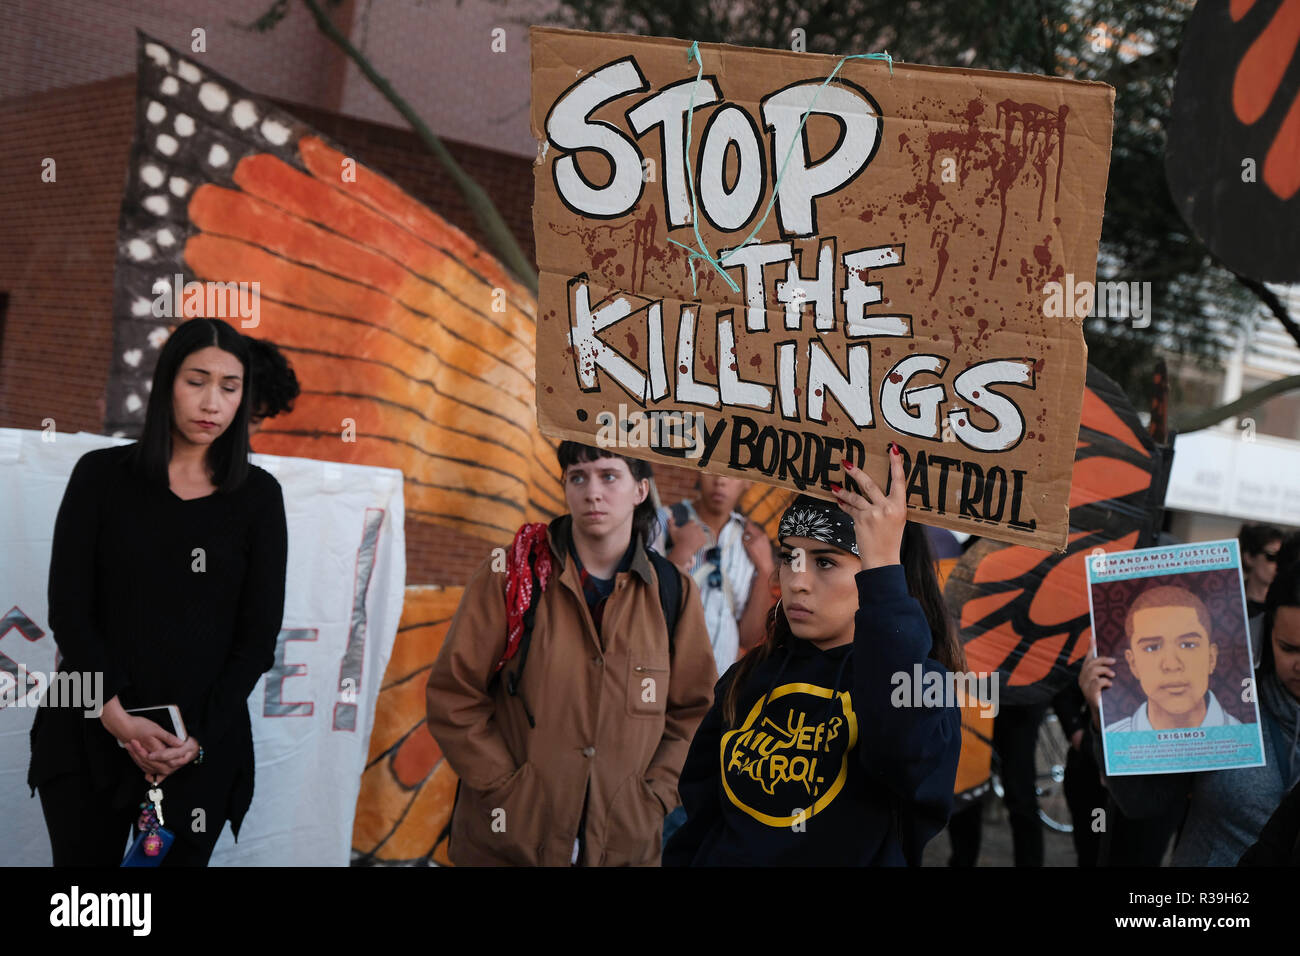 Tucson, Arizona, USA. 21st Nov, 2018. Protesters turn out onto the street of Tucson after the not guilty verdict in the 2012 shooting of Mexican teen Jose Antonio Elena Rodriguez. Border Patrol agent Lonnie Swartz shot the teen 16 times through the border fence in Nogales after the boy was allegedly throwing rocks at agents. Instead of retreating for cover like other agents Swartz chose to use deadly force and kill the fleeing Rodriguez . This was the the second trial of Swartz and the aquittal on involuntary manslaughter charges followed a not guilty verdict on federal charges last year Stock Photo